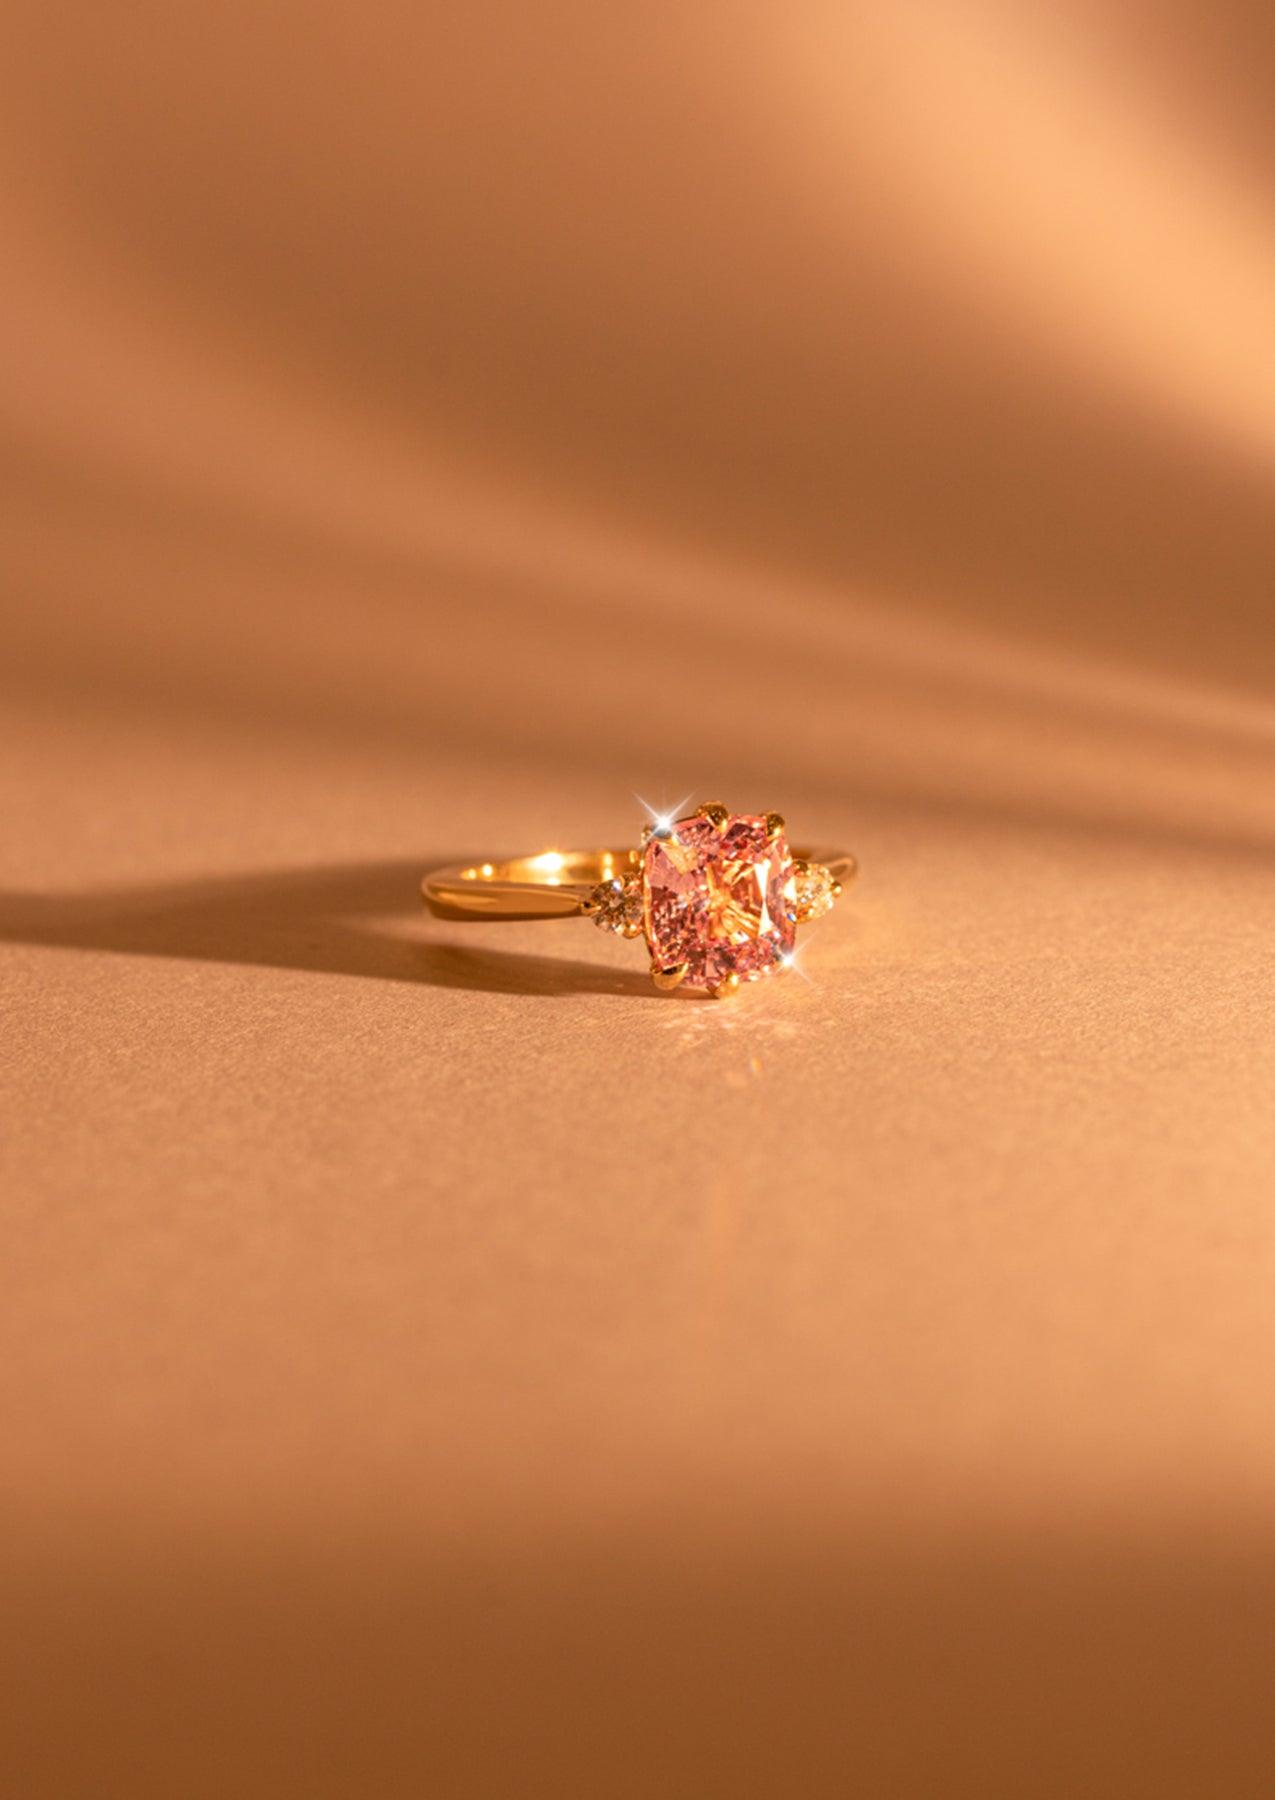 The Esme Ring with 2.24ct Cushion Morganite - Molten Store